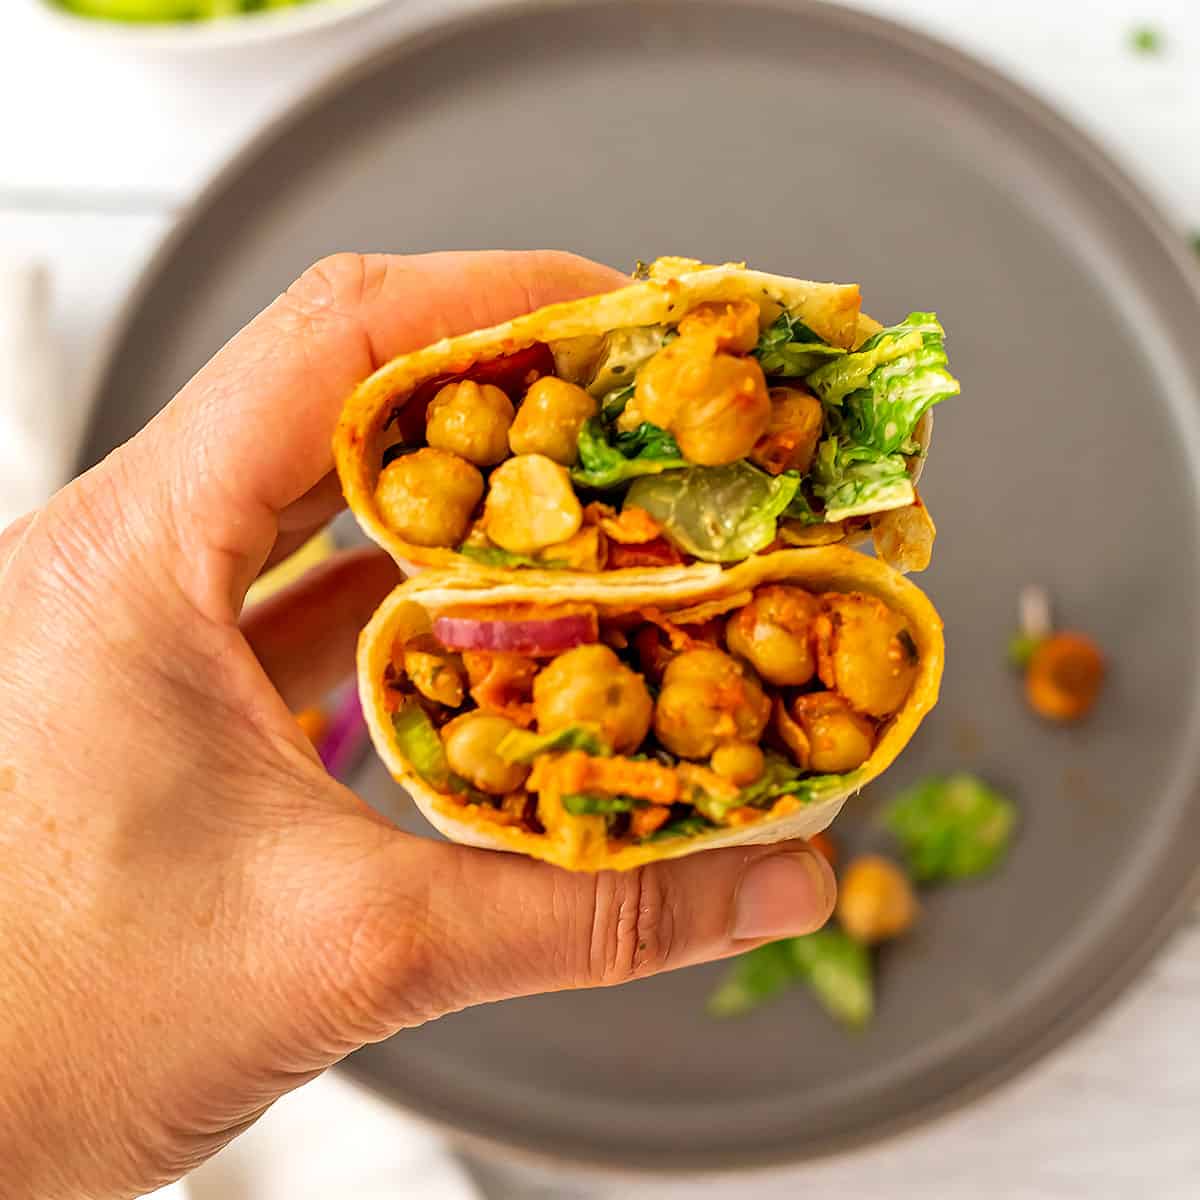 Buffalo chickpea wrap cut in half being held by a hand over grey plate.